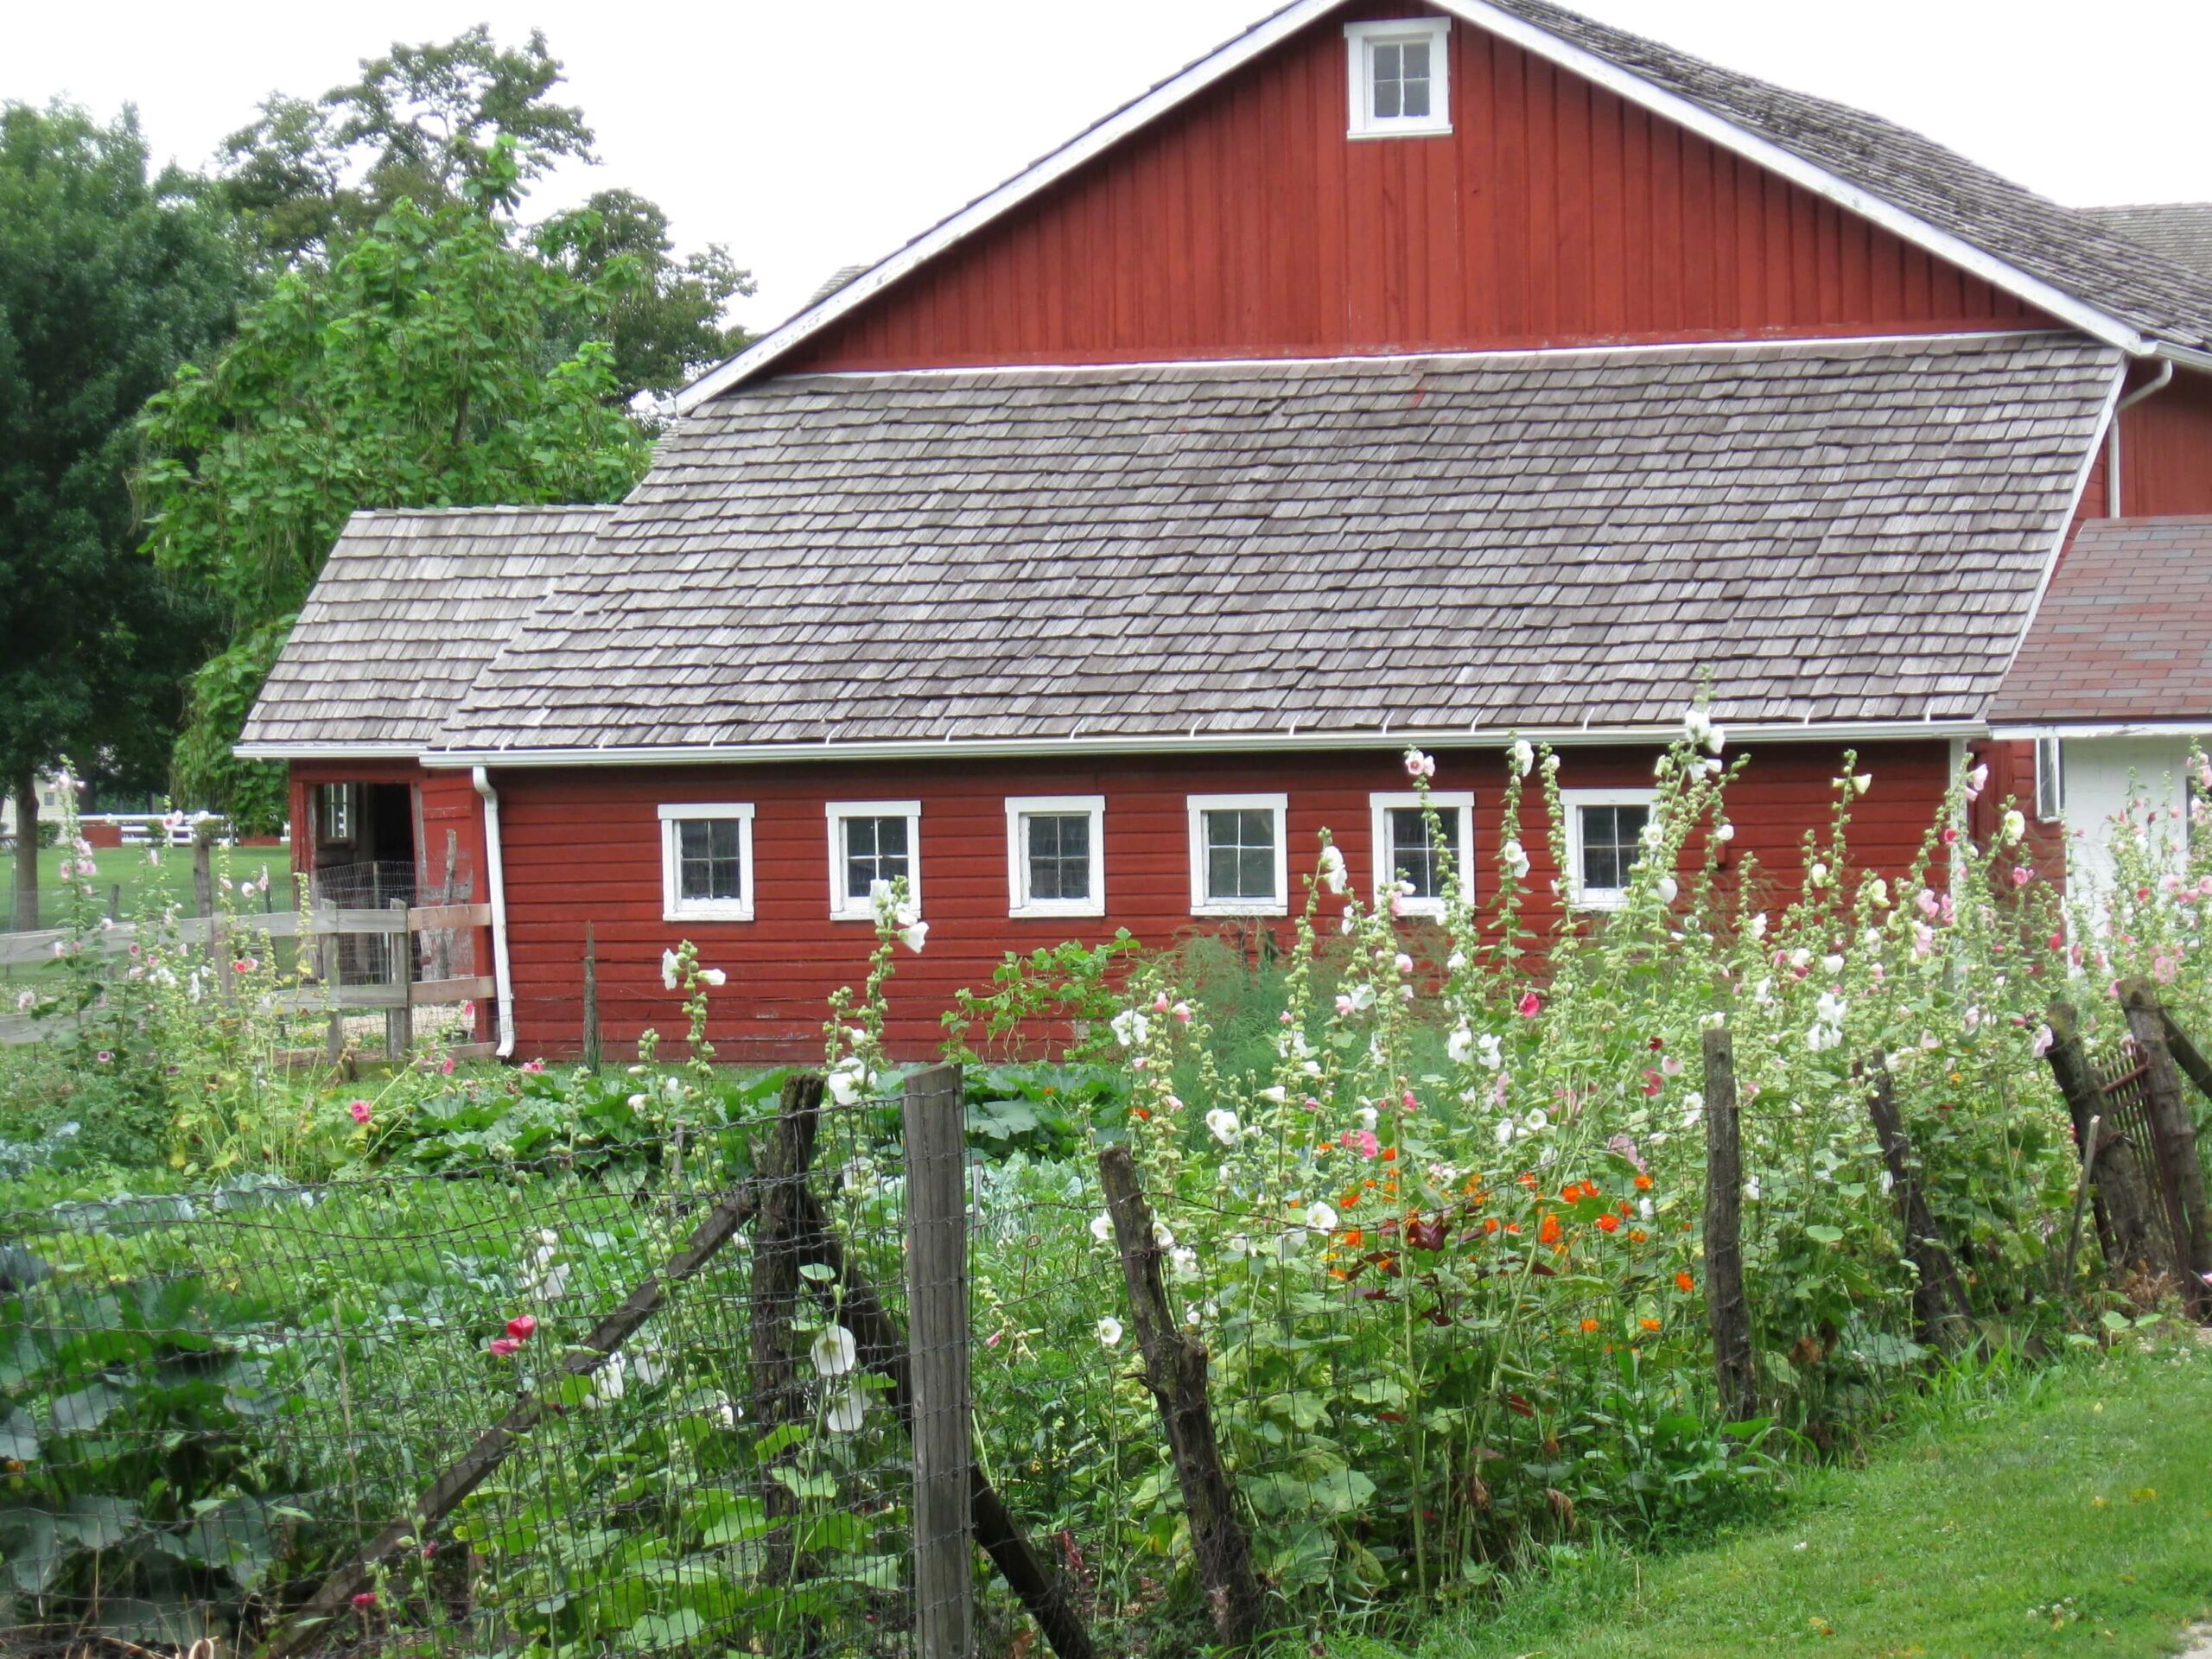 Red barn behind a field of flowers